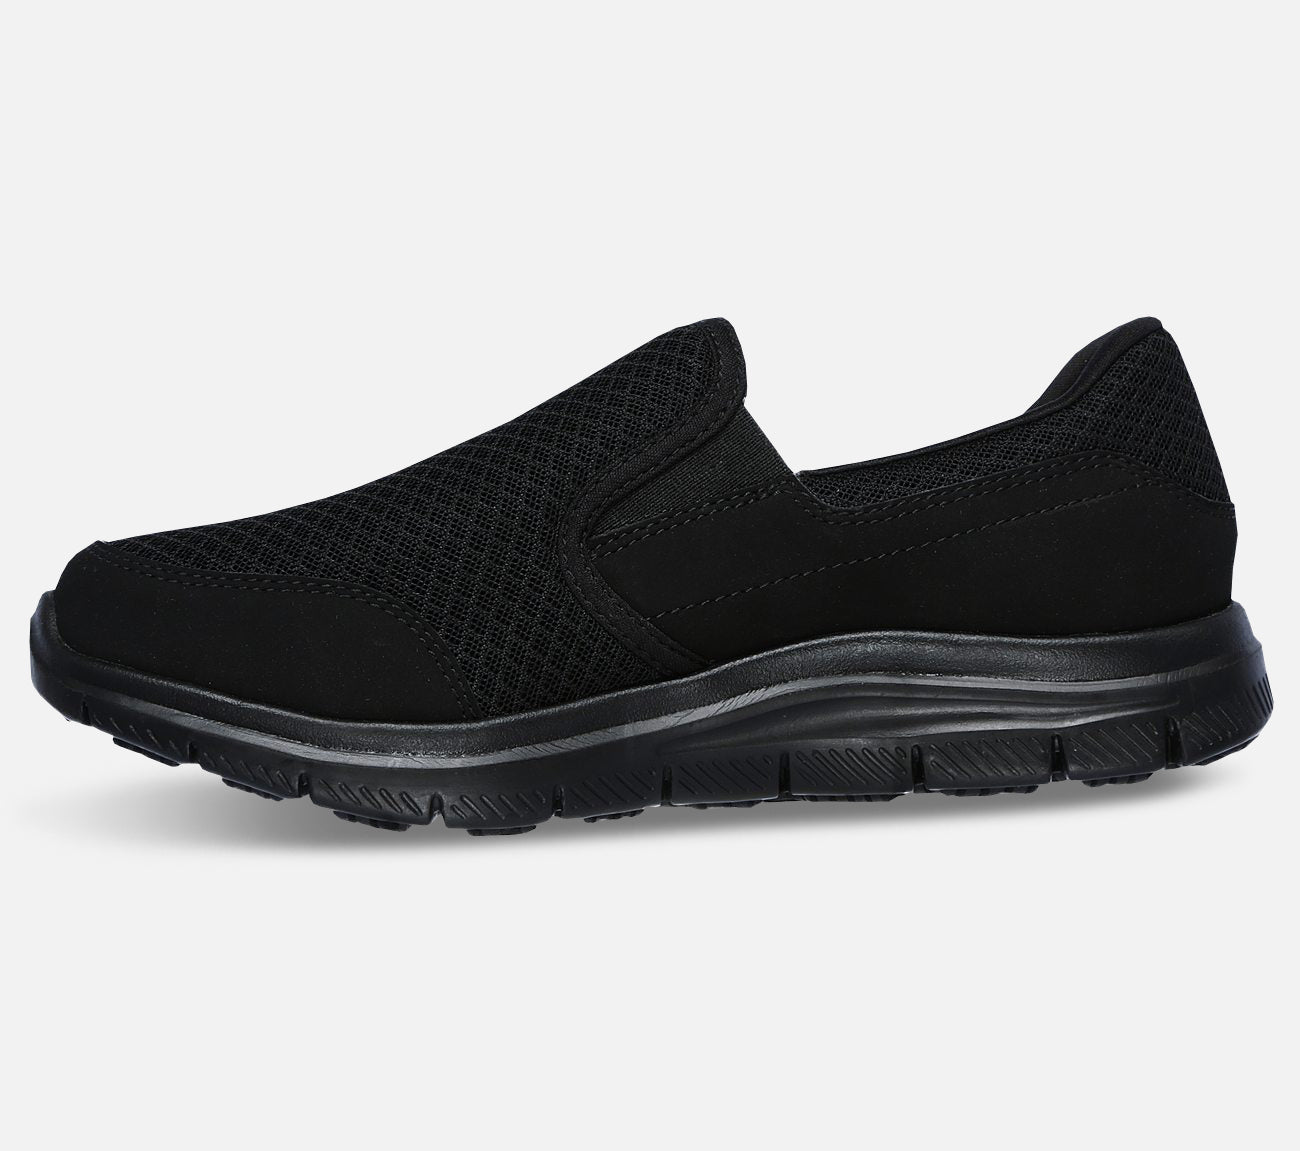 Relaxed Fit: Work Cozard SR Work Skechers